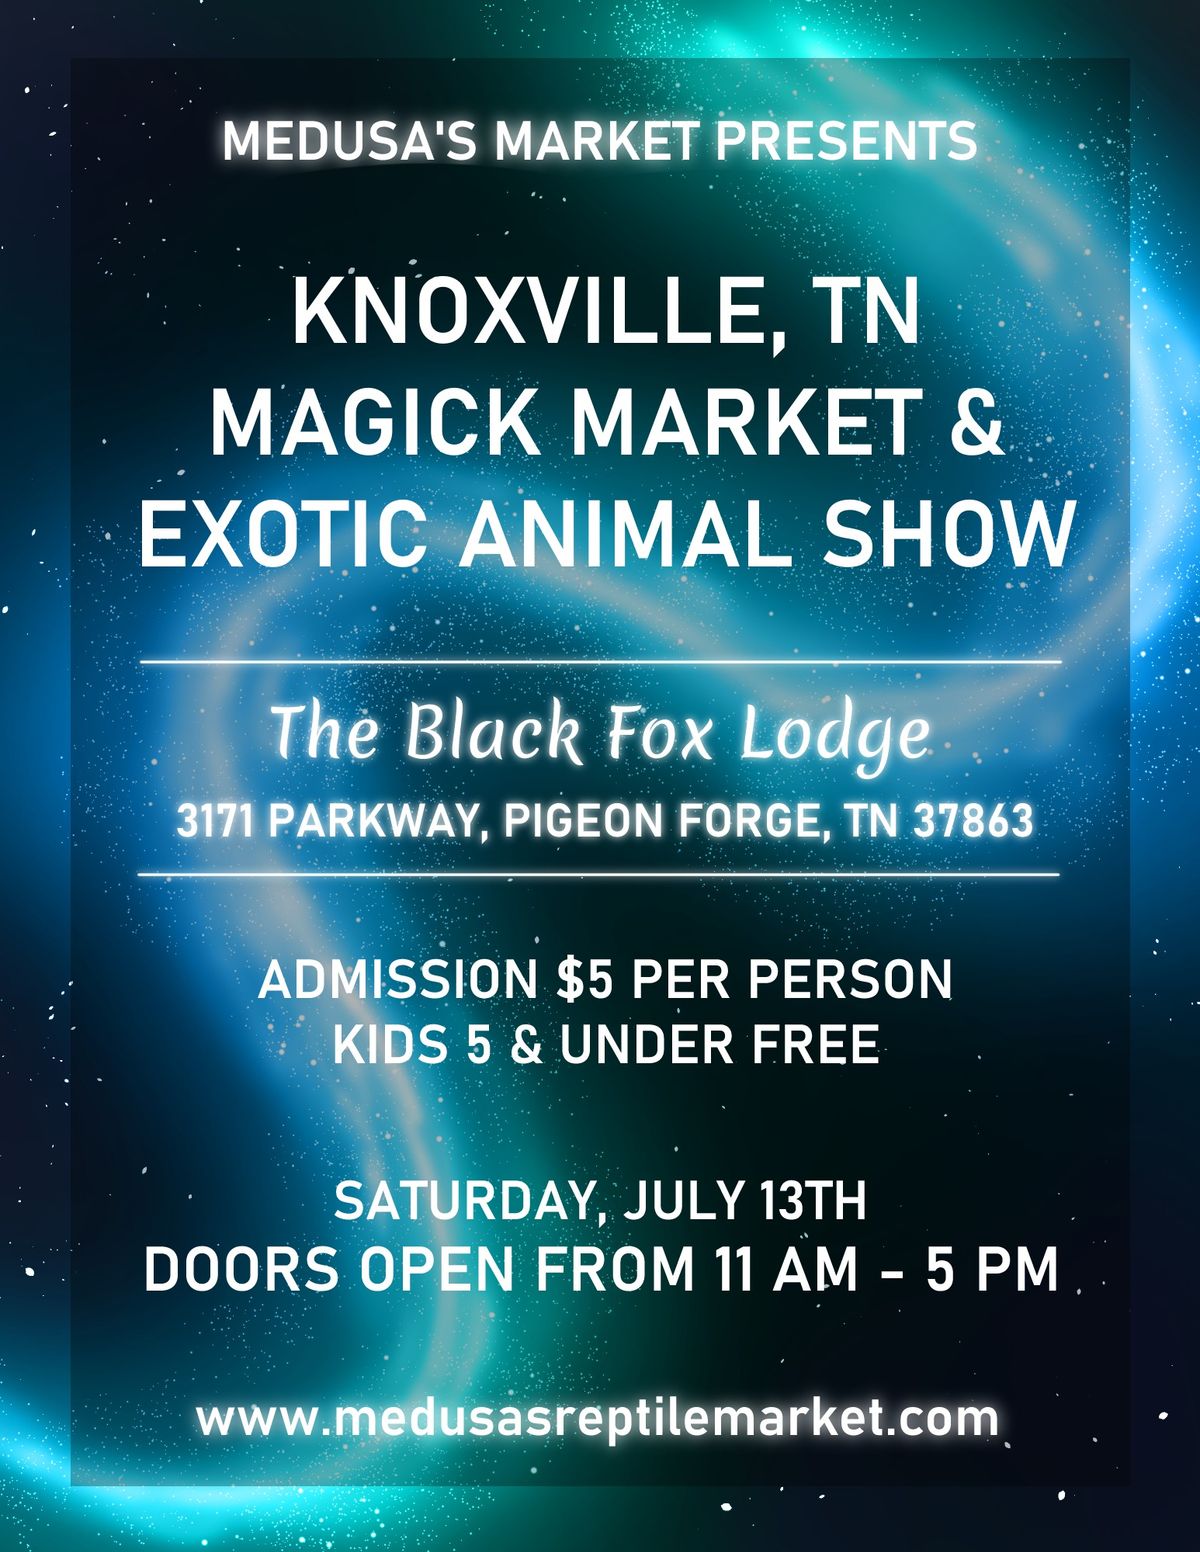 Knoxville\/Pigeon Forge, TN Magick Market & Exotic Animal Show